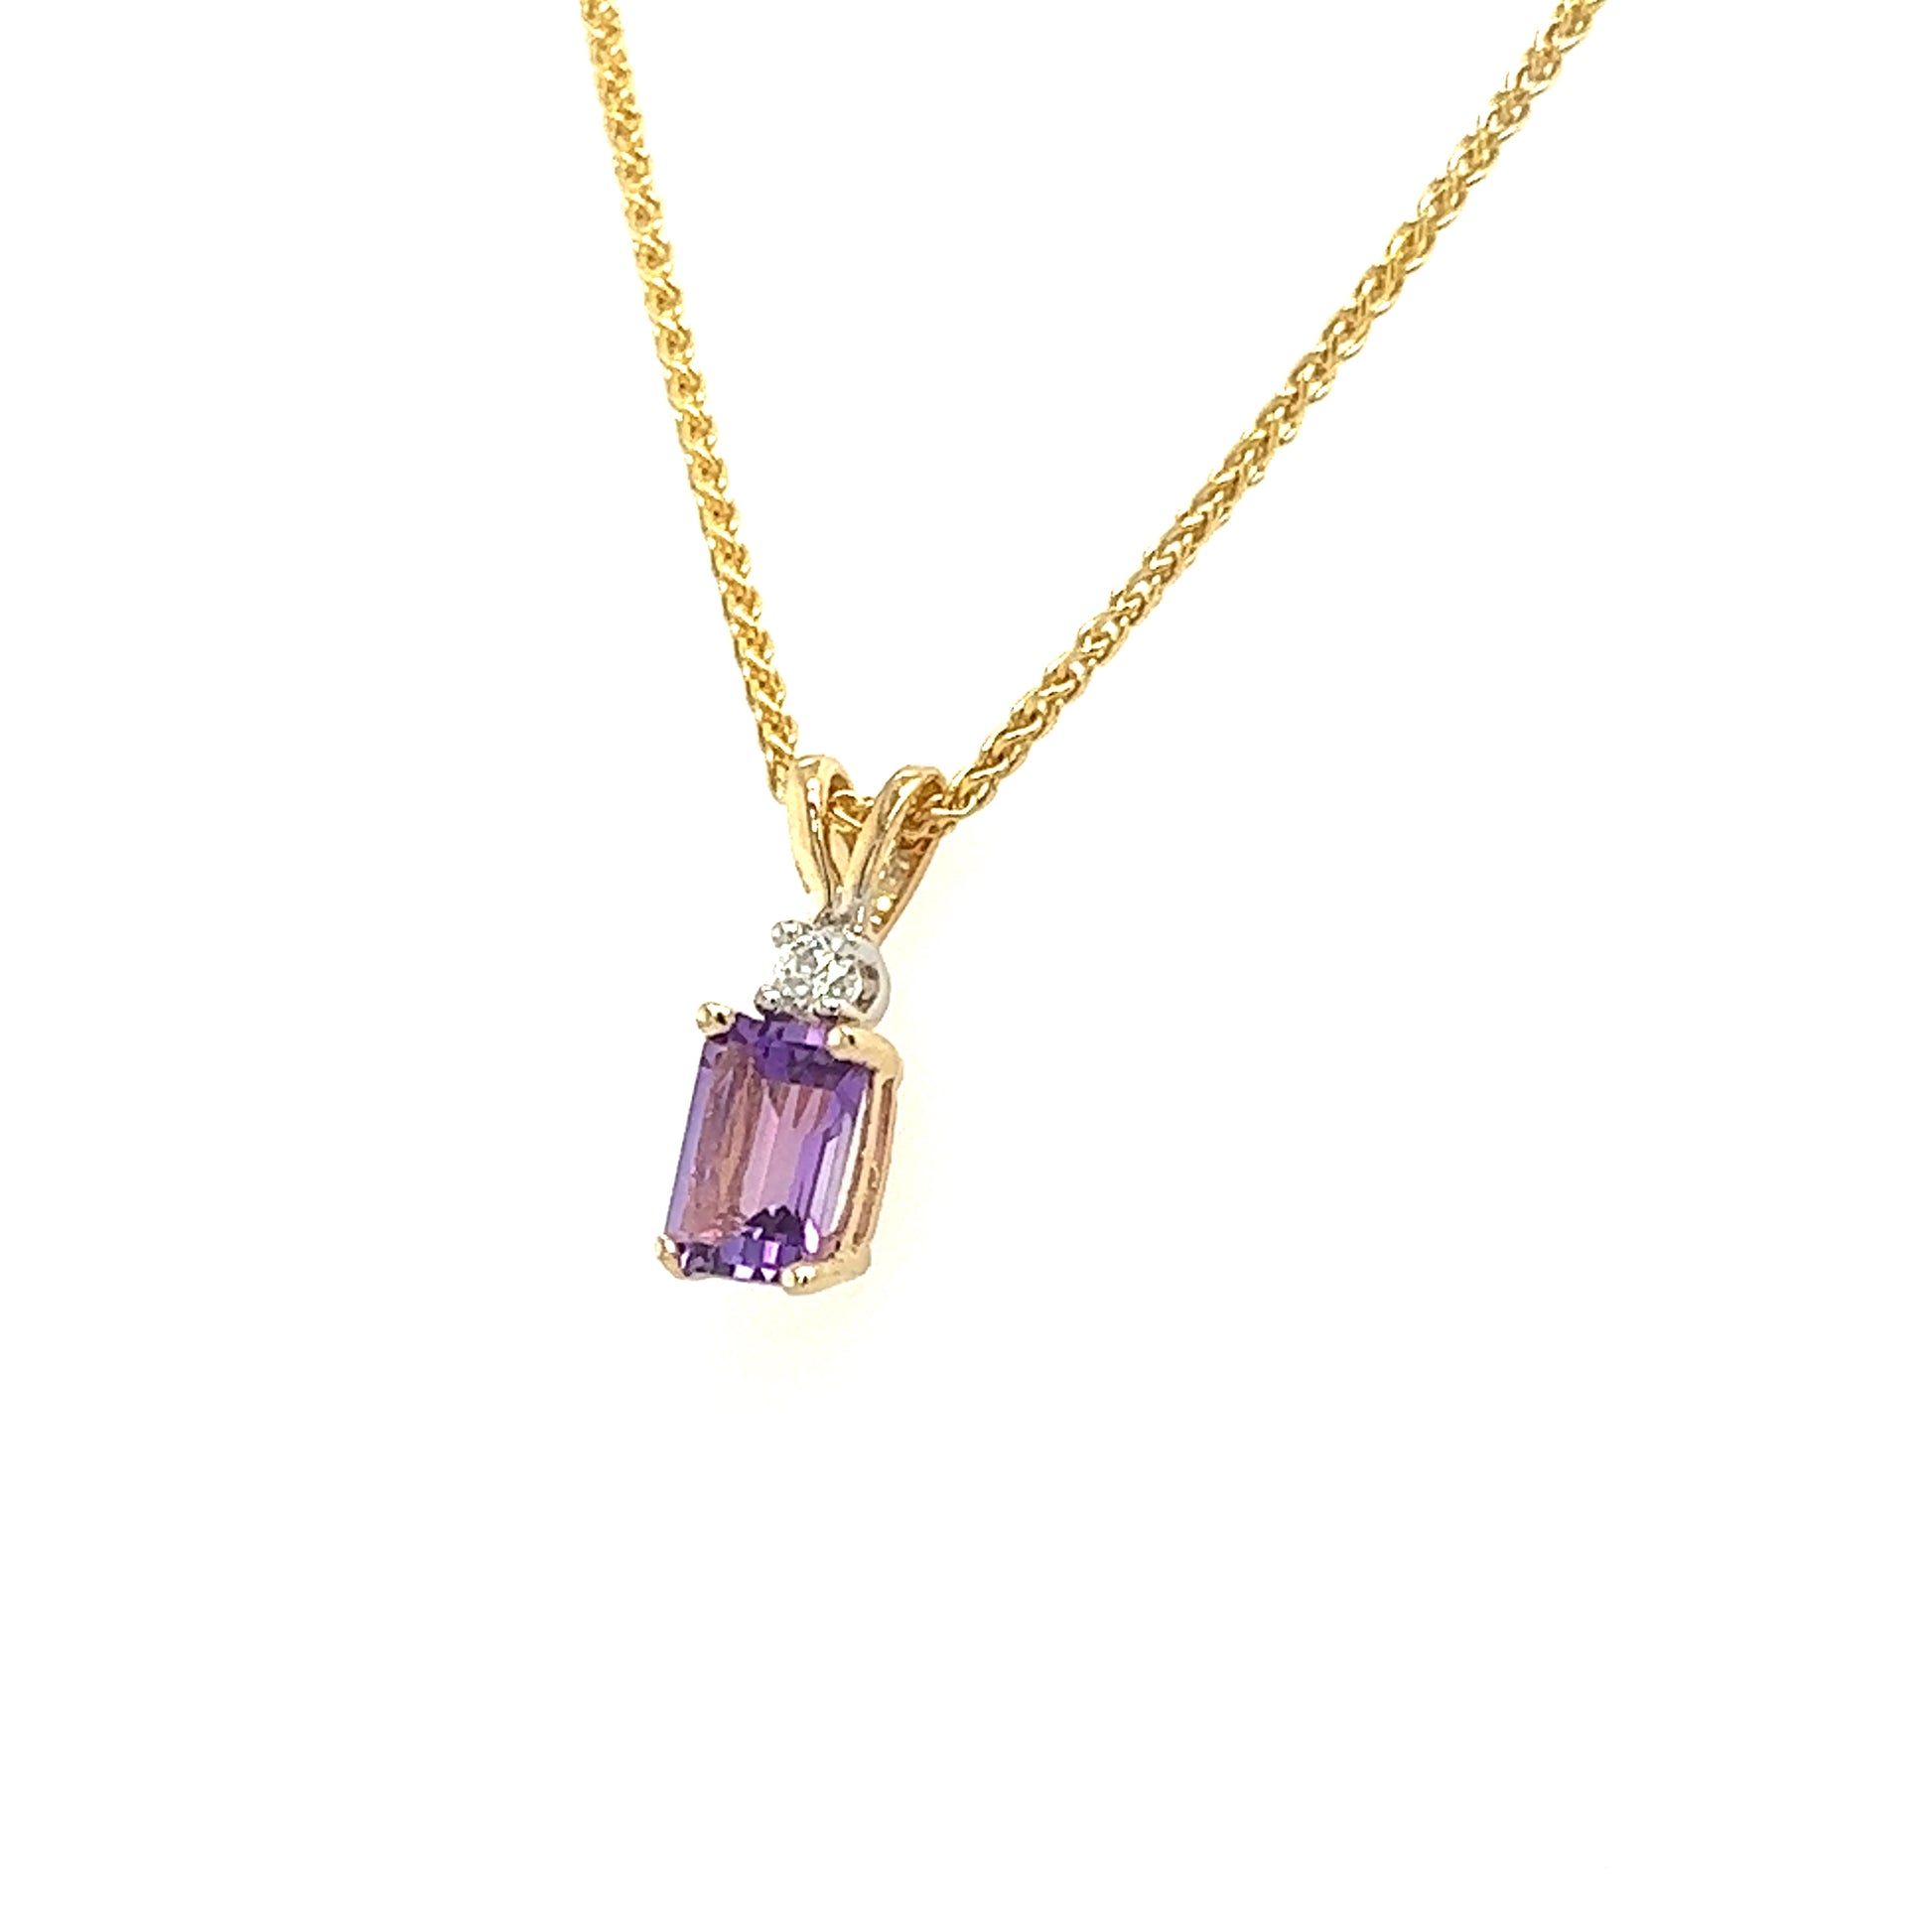 Baguette Amethyst Pendant with Diamond Accent is 14K Yellow Gold Pendant and Chain Right Side View